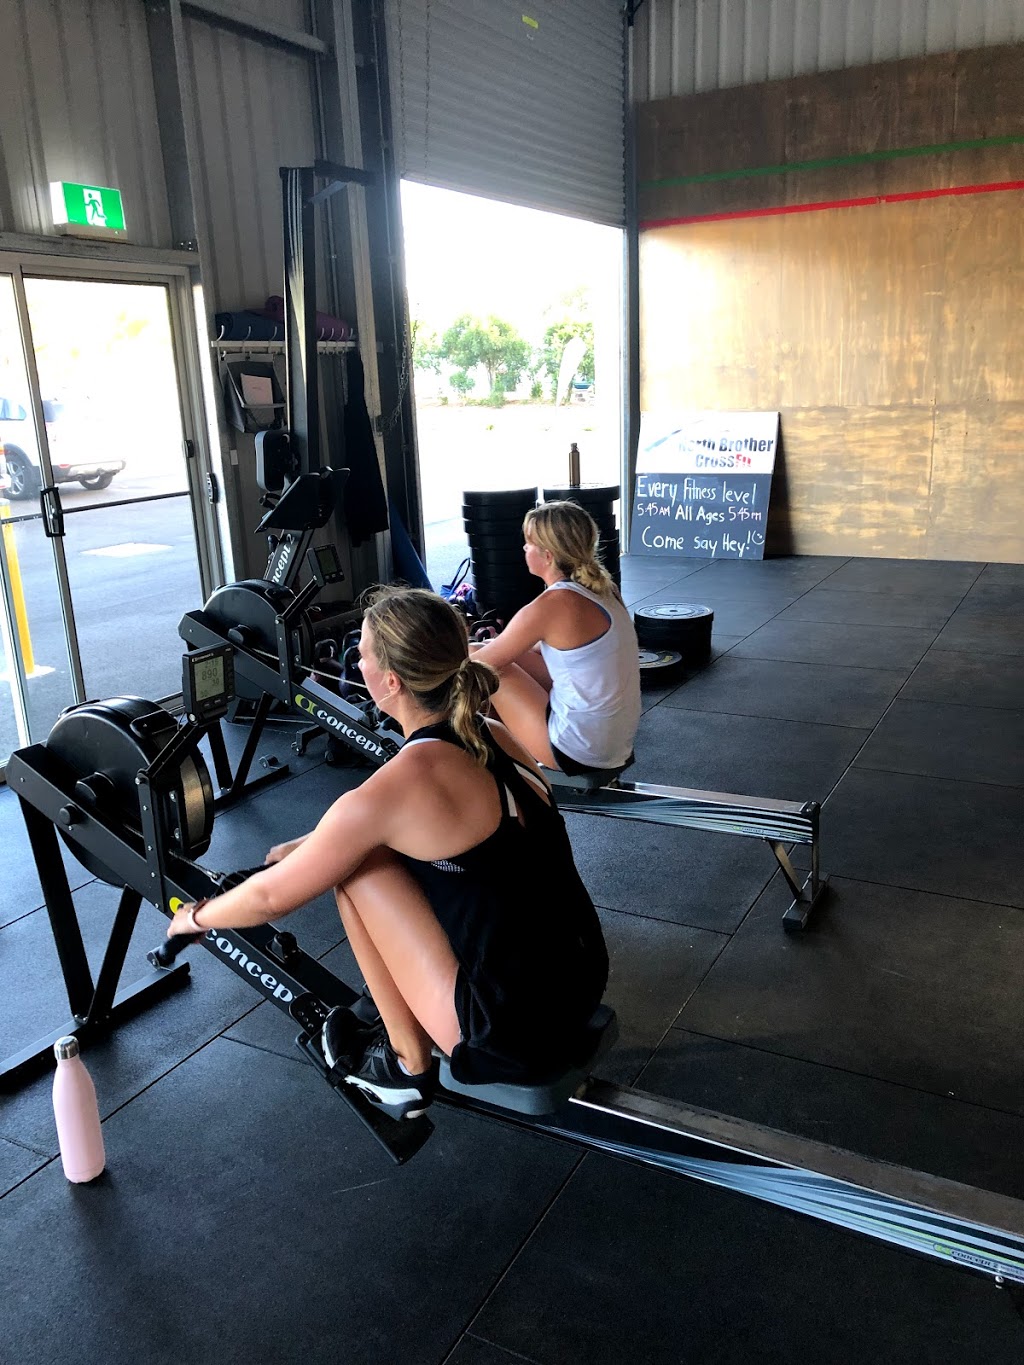 Northbrother CrossFit | gym | Bay, 40 Bayside Circuit, Laurieton NSW 2443, Australia | 0412988564 OR +61 412 988 564